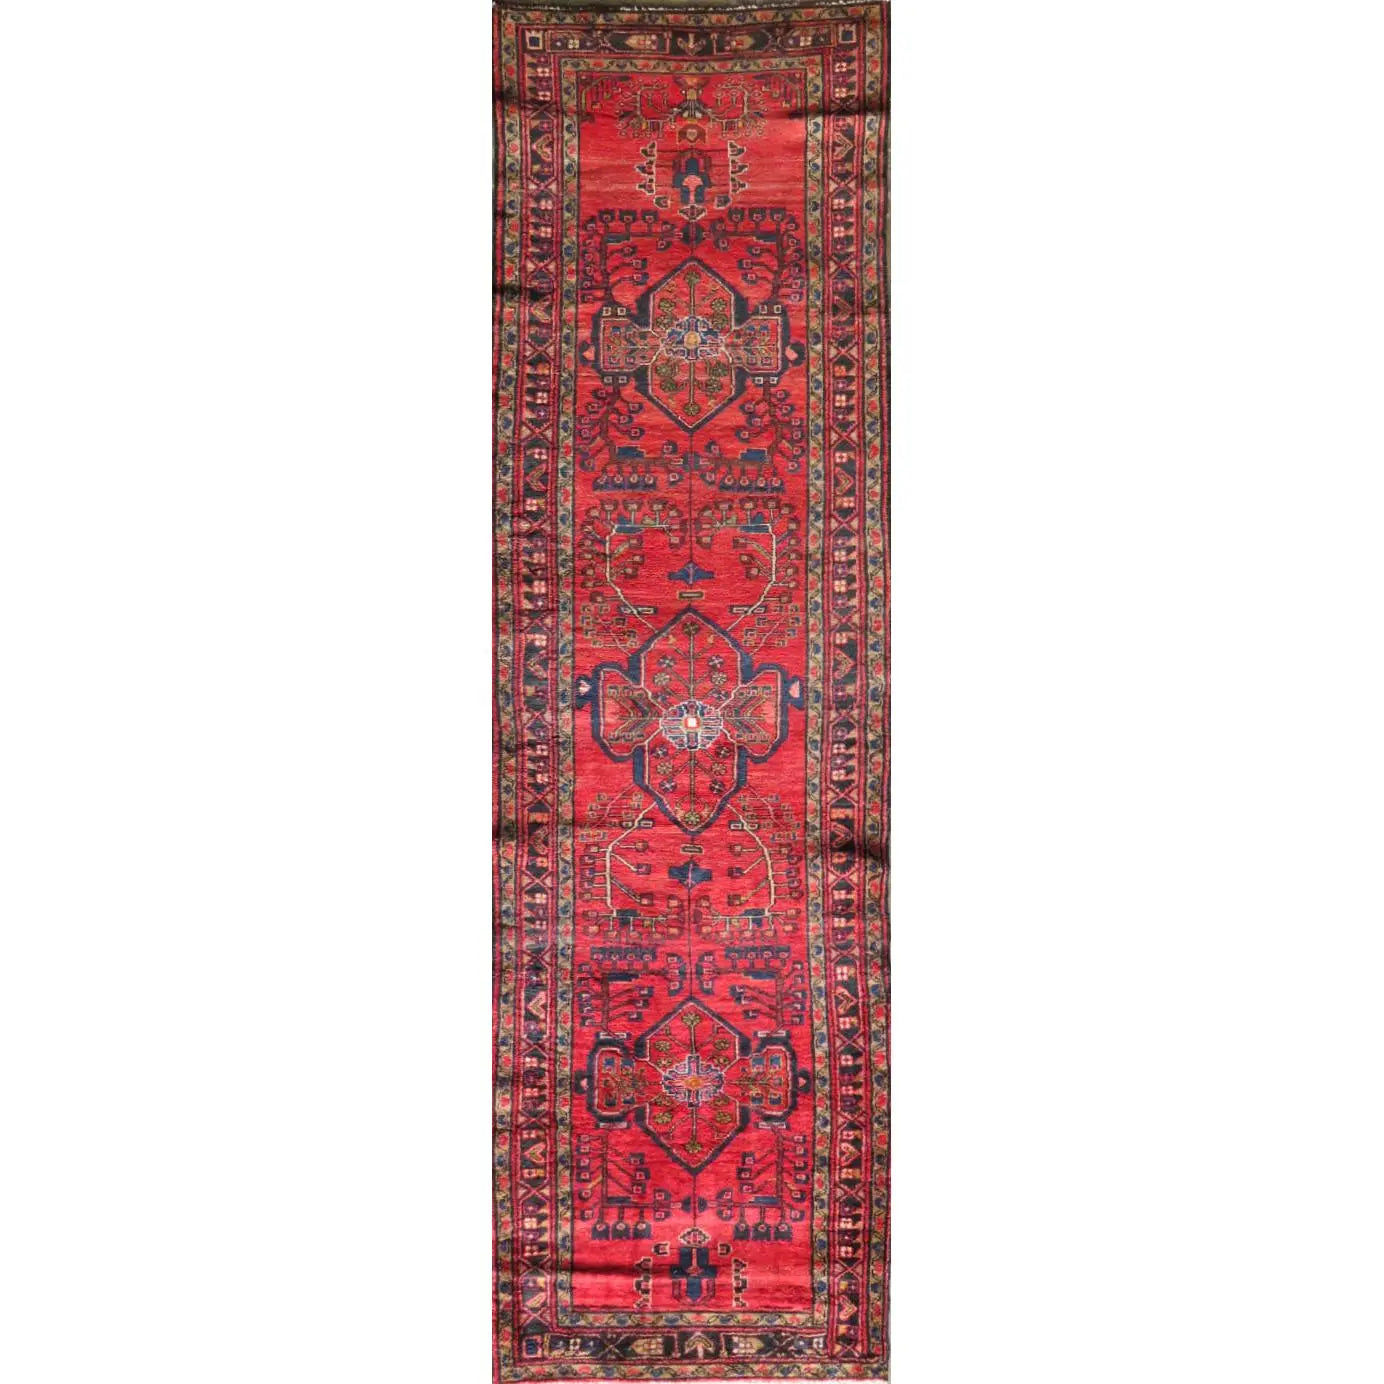 Hand-Knotted Persian Wool Rug _ Luxurious Vintage Design, 12'5" x 3'4", Artisan Crafted